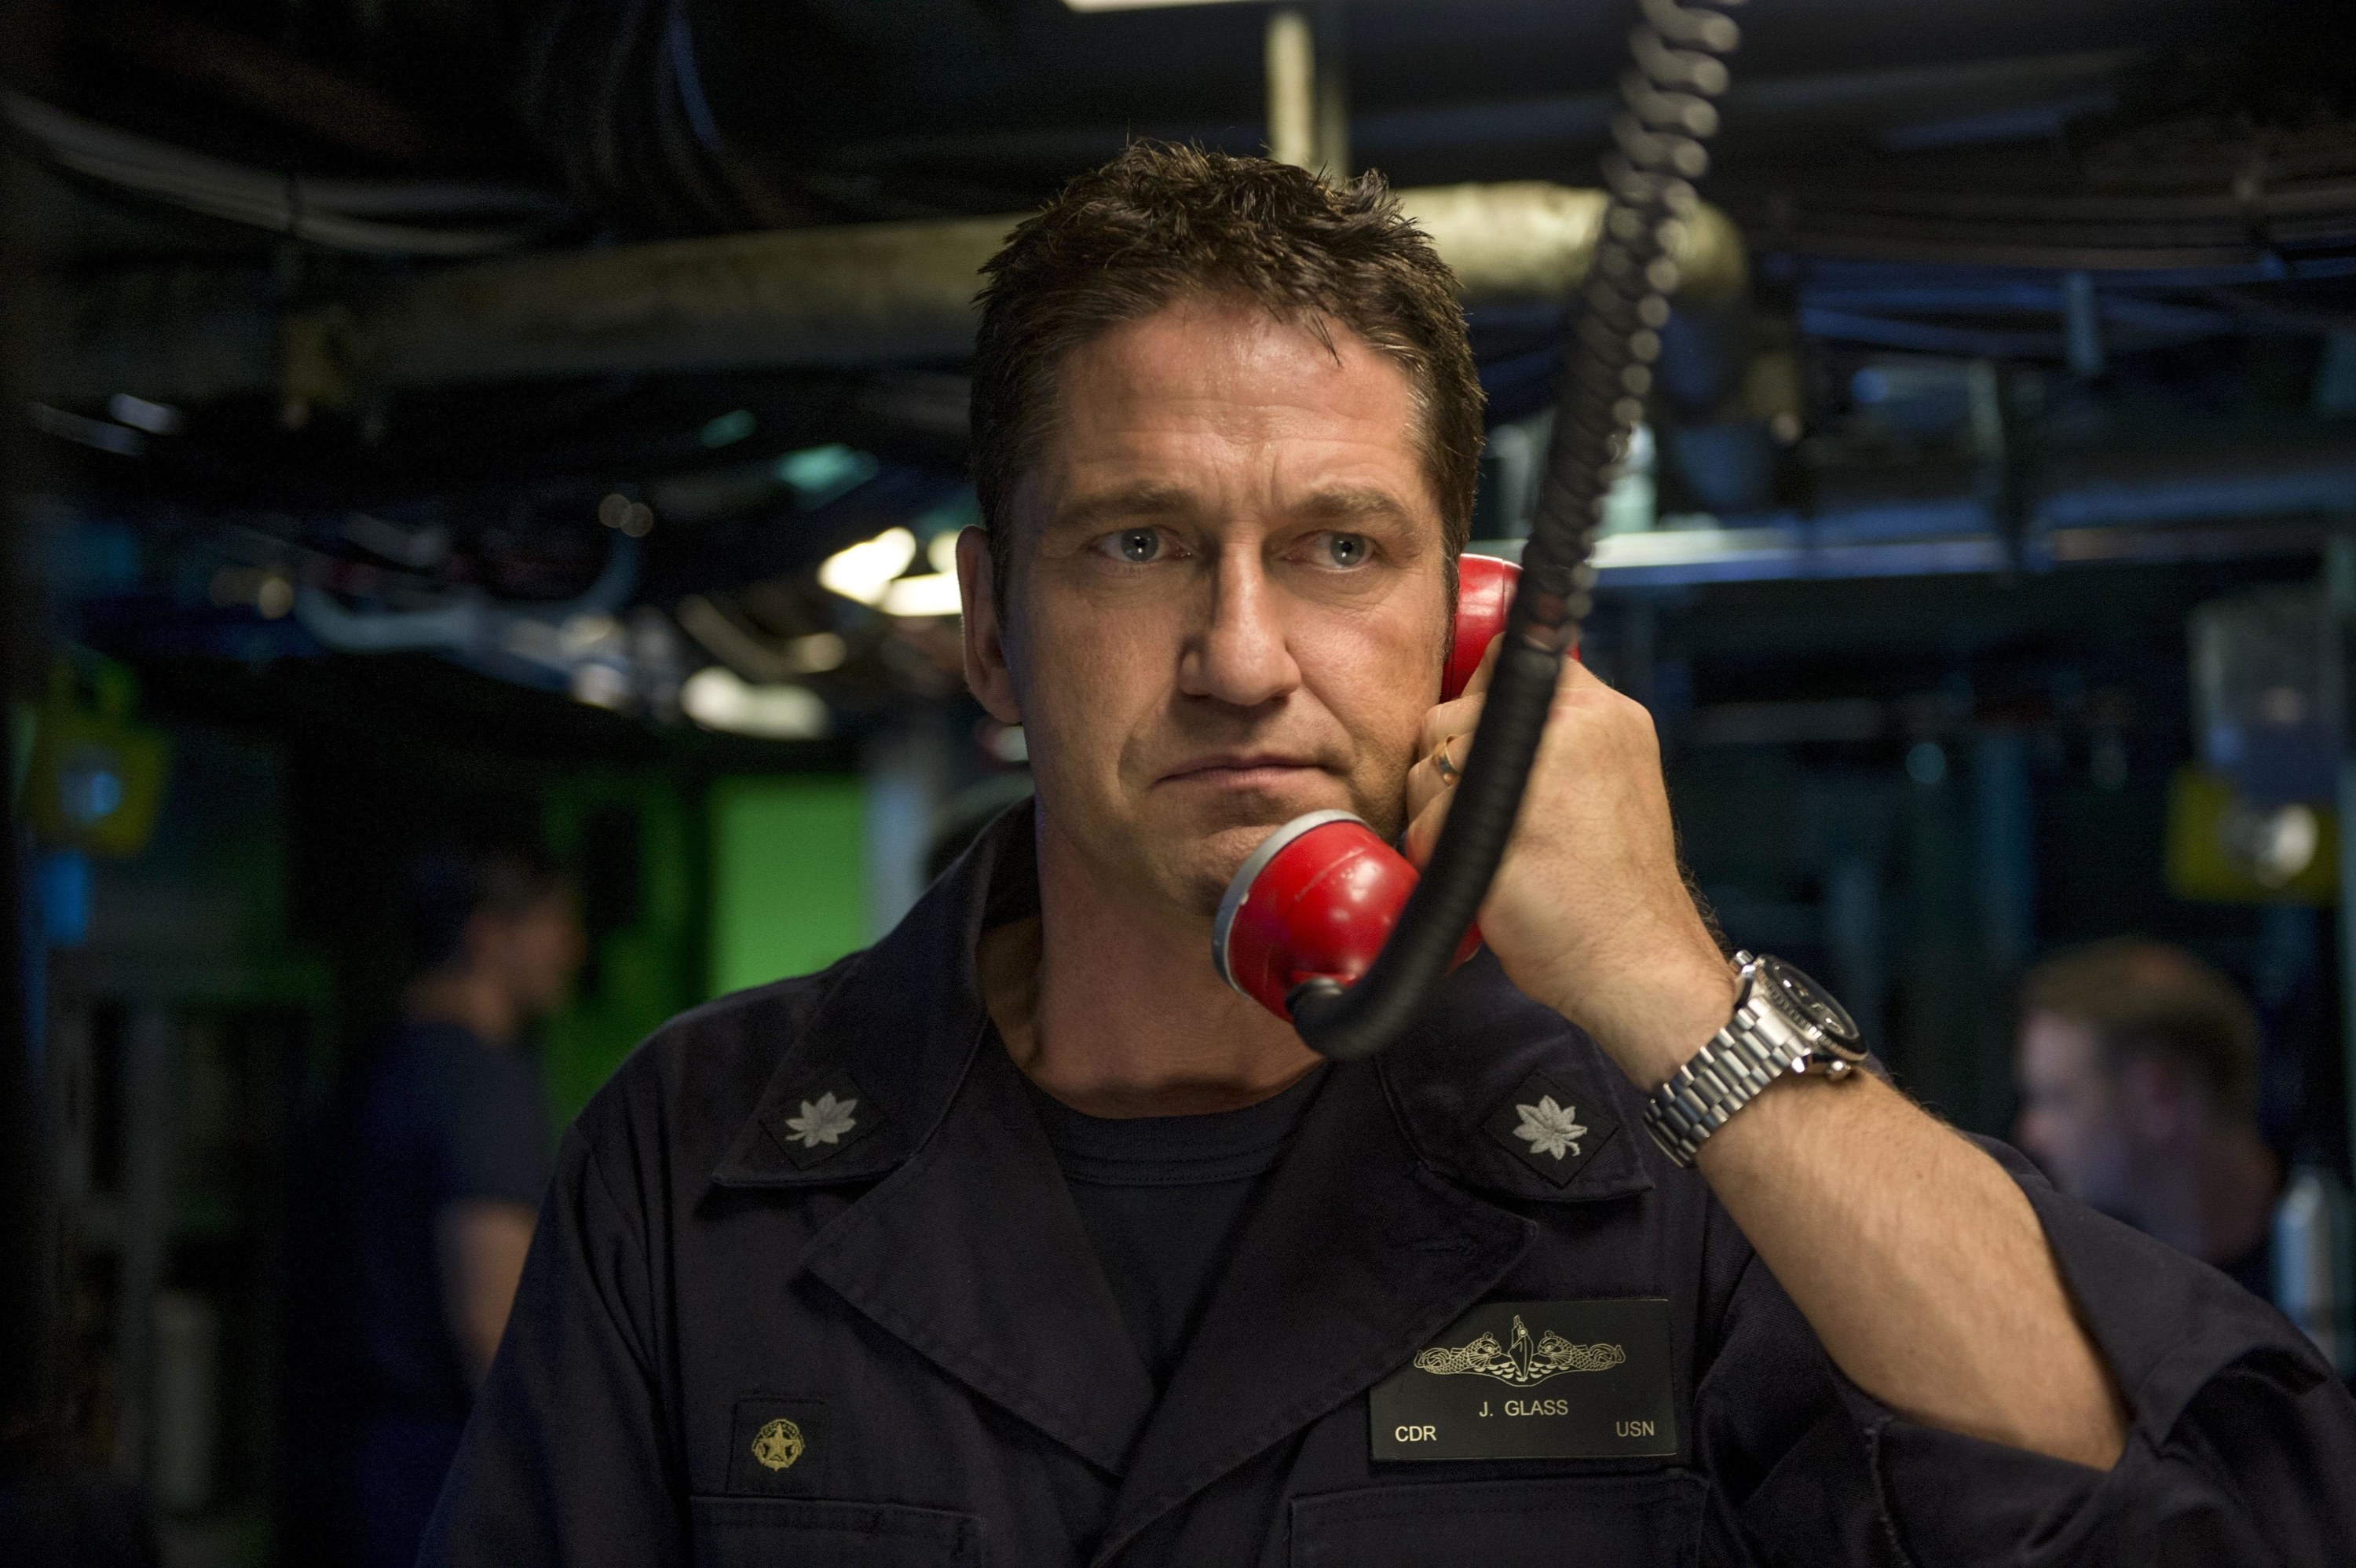 An intense submarine commander picks up a red telephone